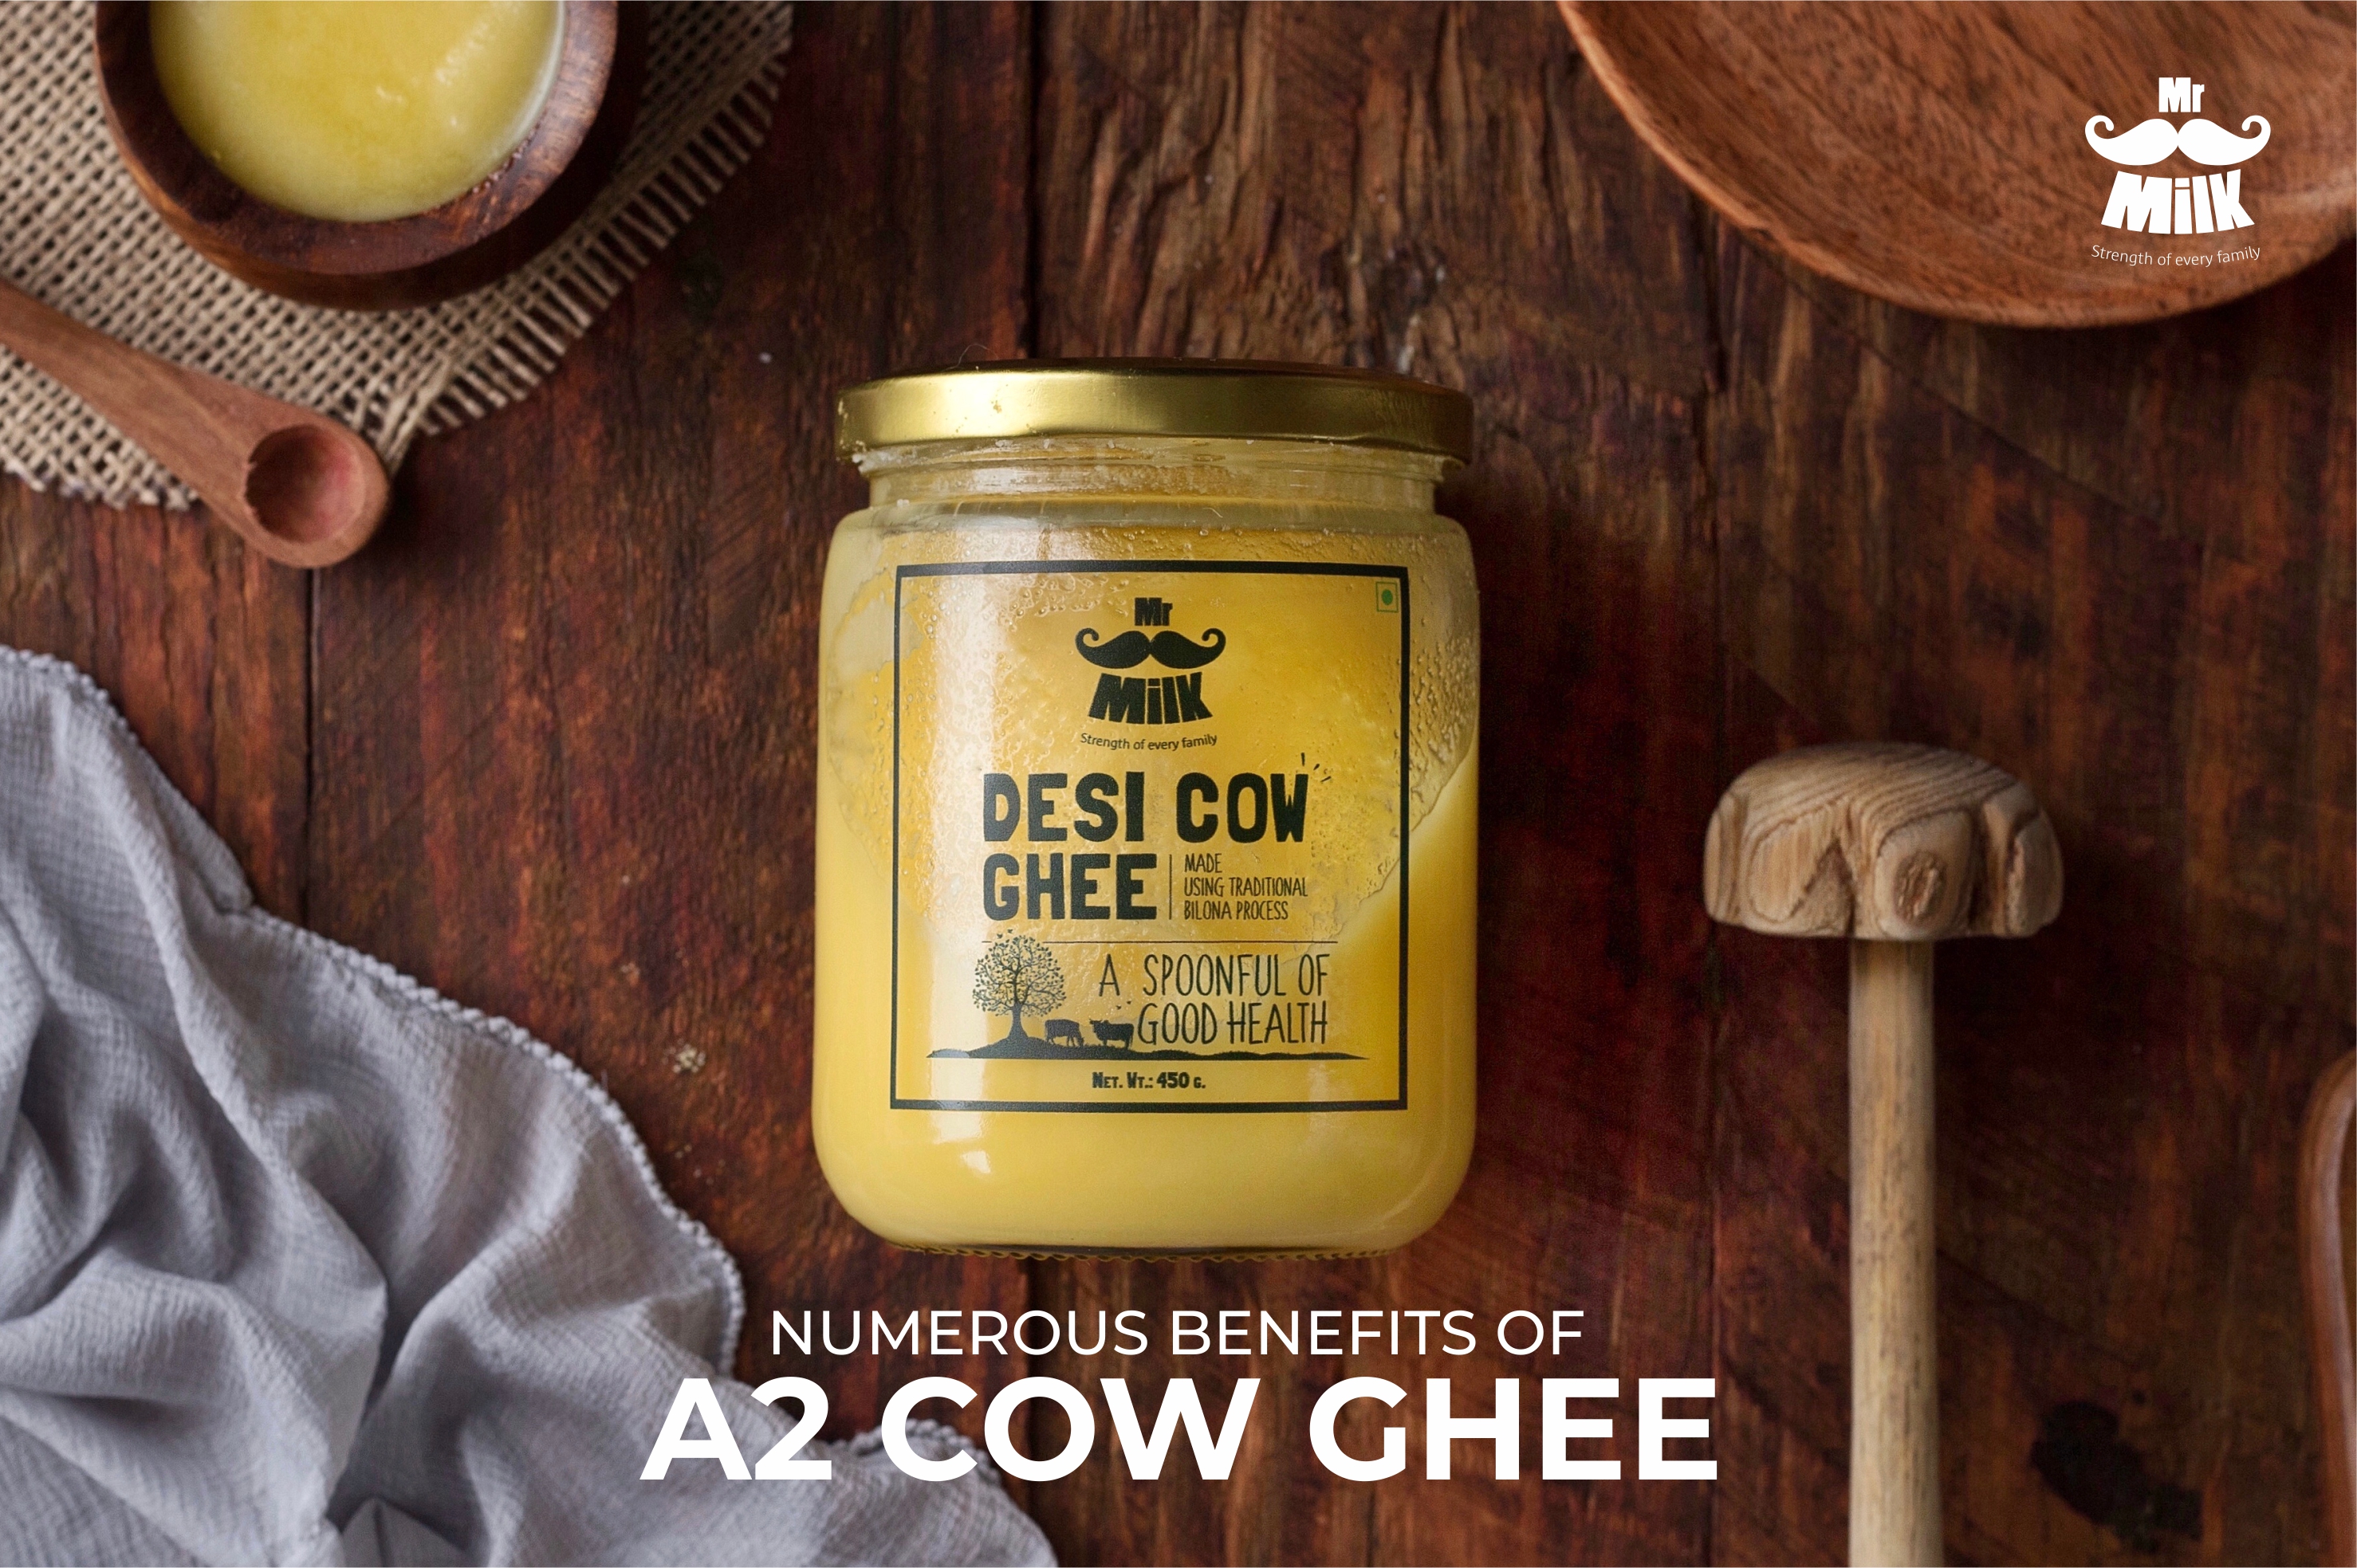 Numerous benefits of A2 Cow Ghee